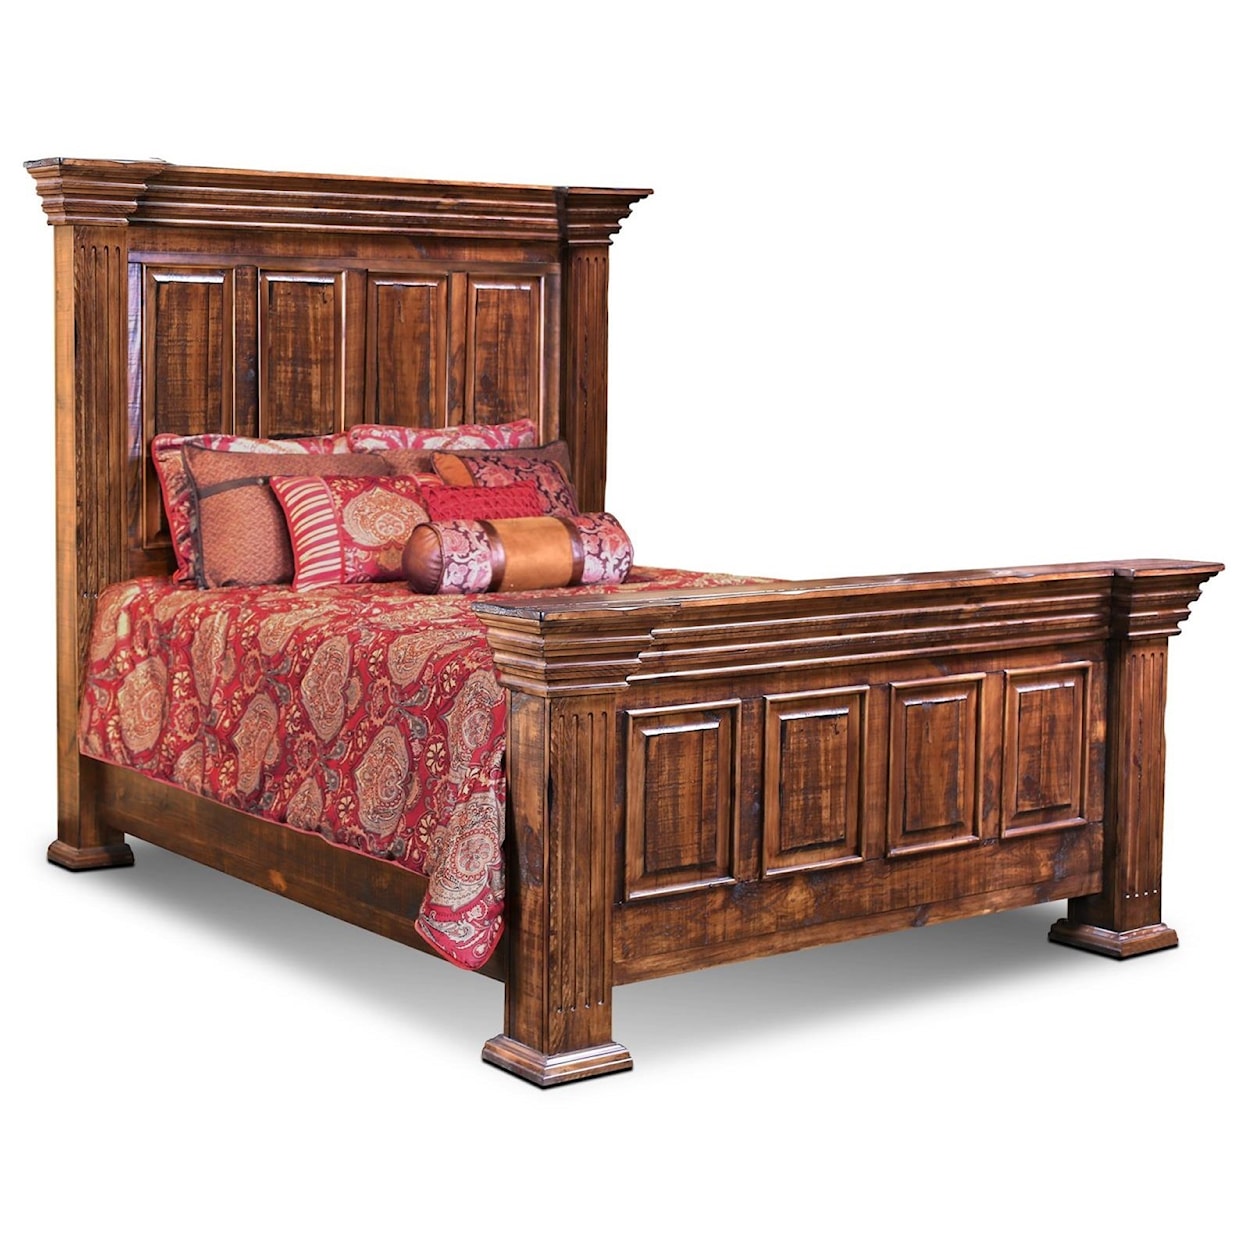 Horizon Home Cathedral King Panel Bed